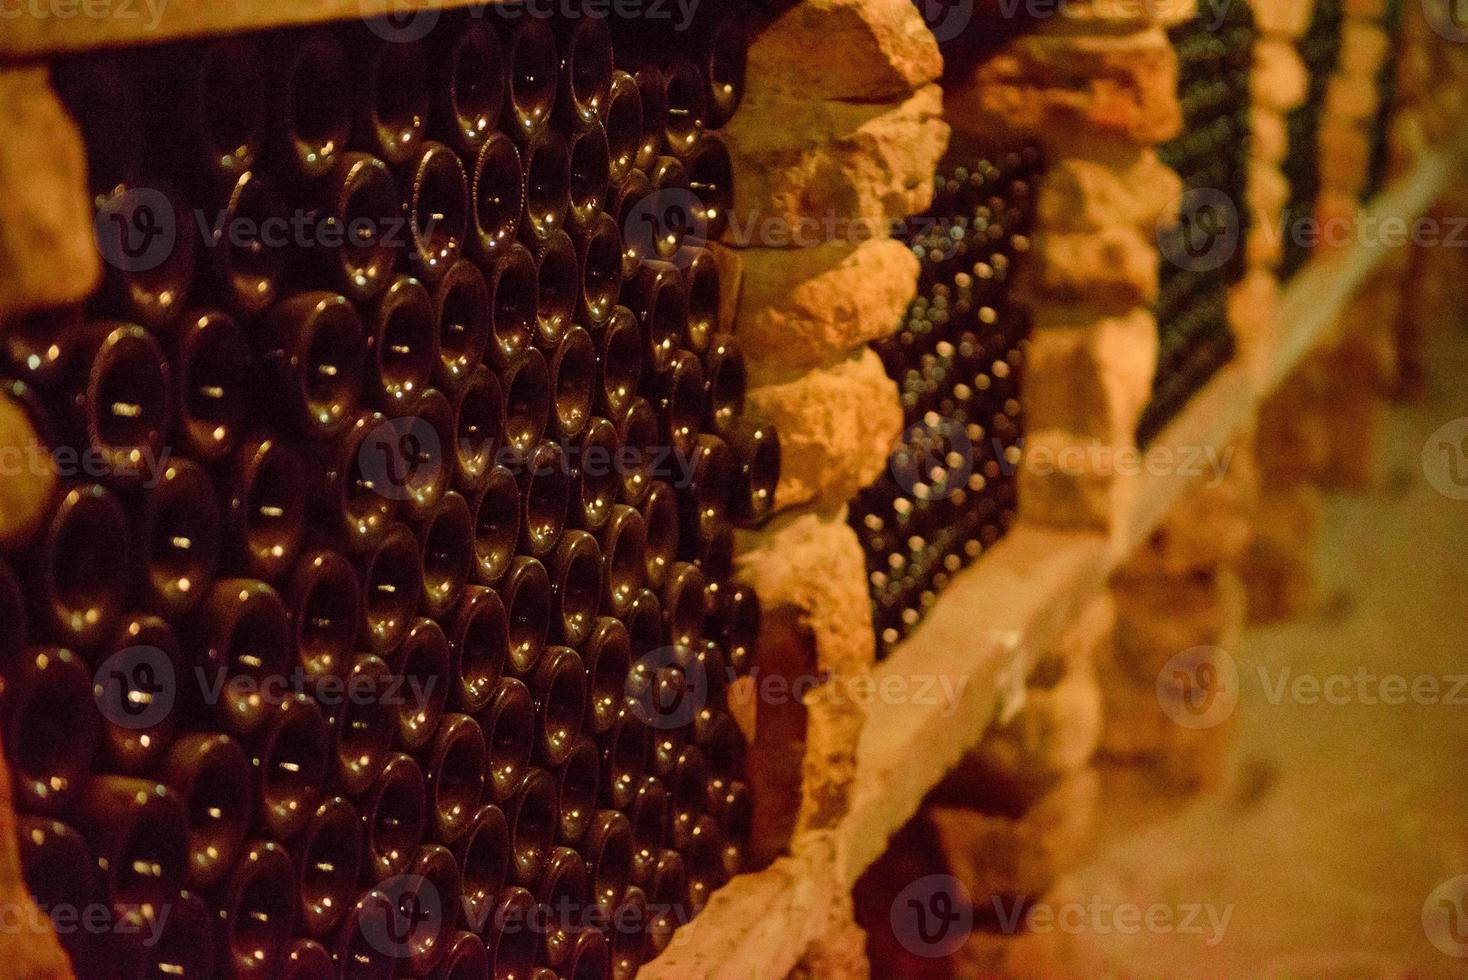 Red wine bottles in a cellar photo